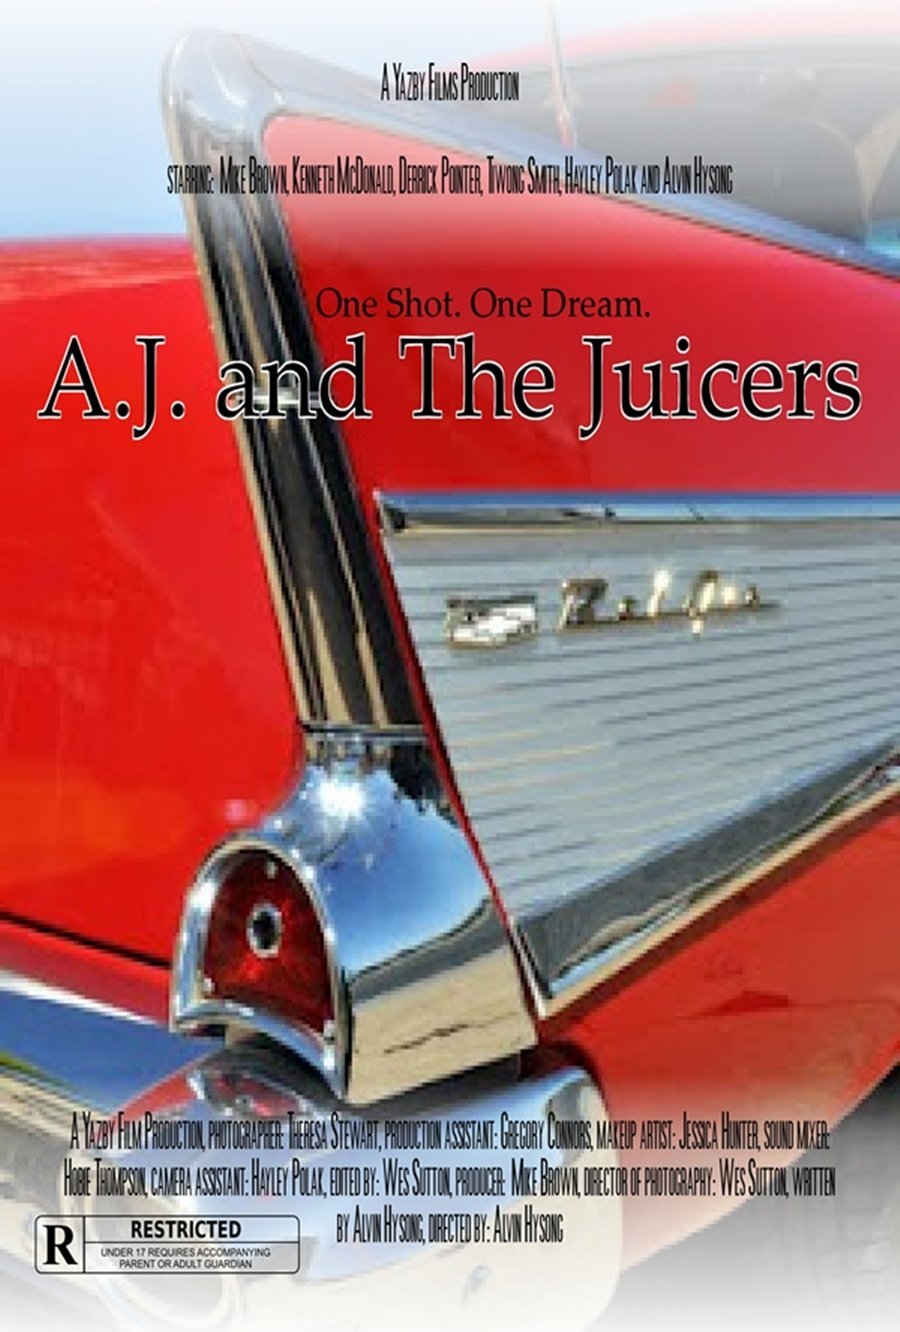 Фото - A. J. and the Juicers: 900x1332 / 170 Кб